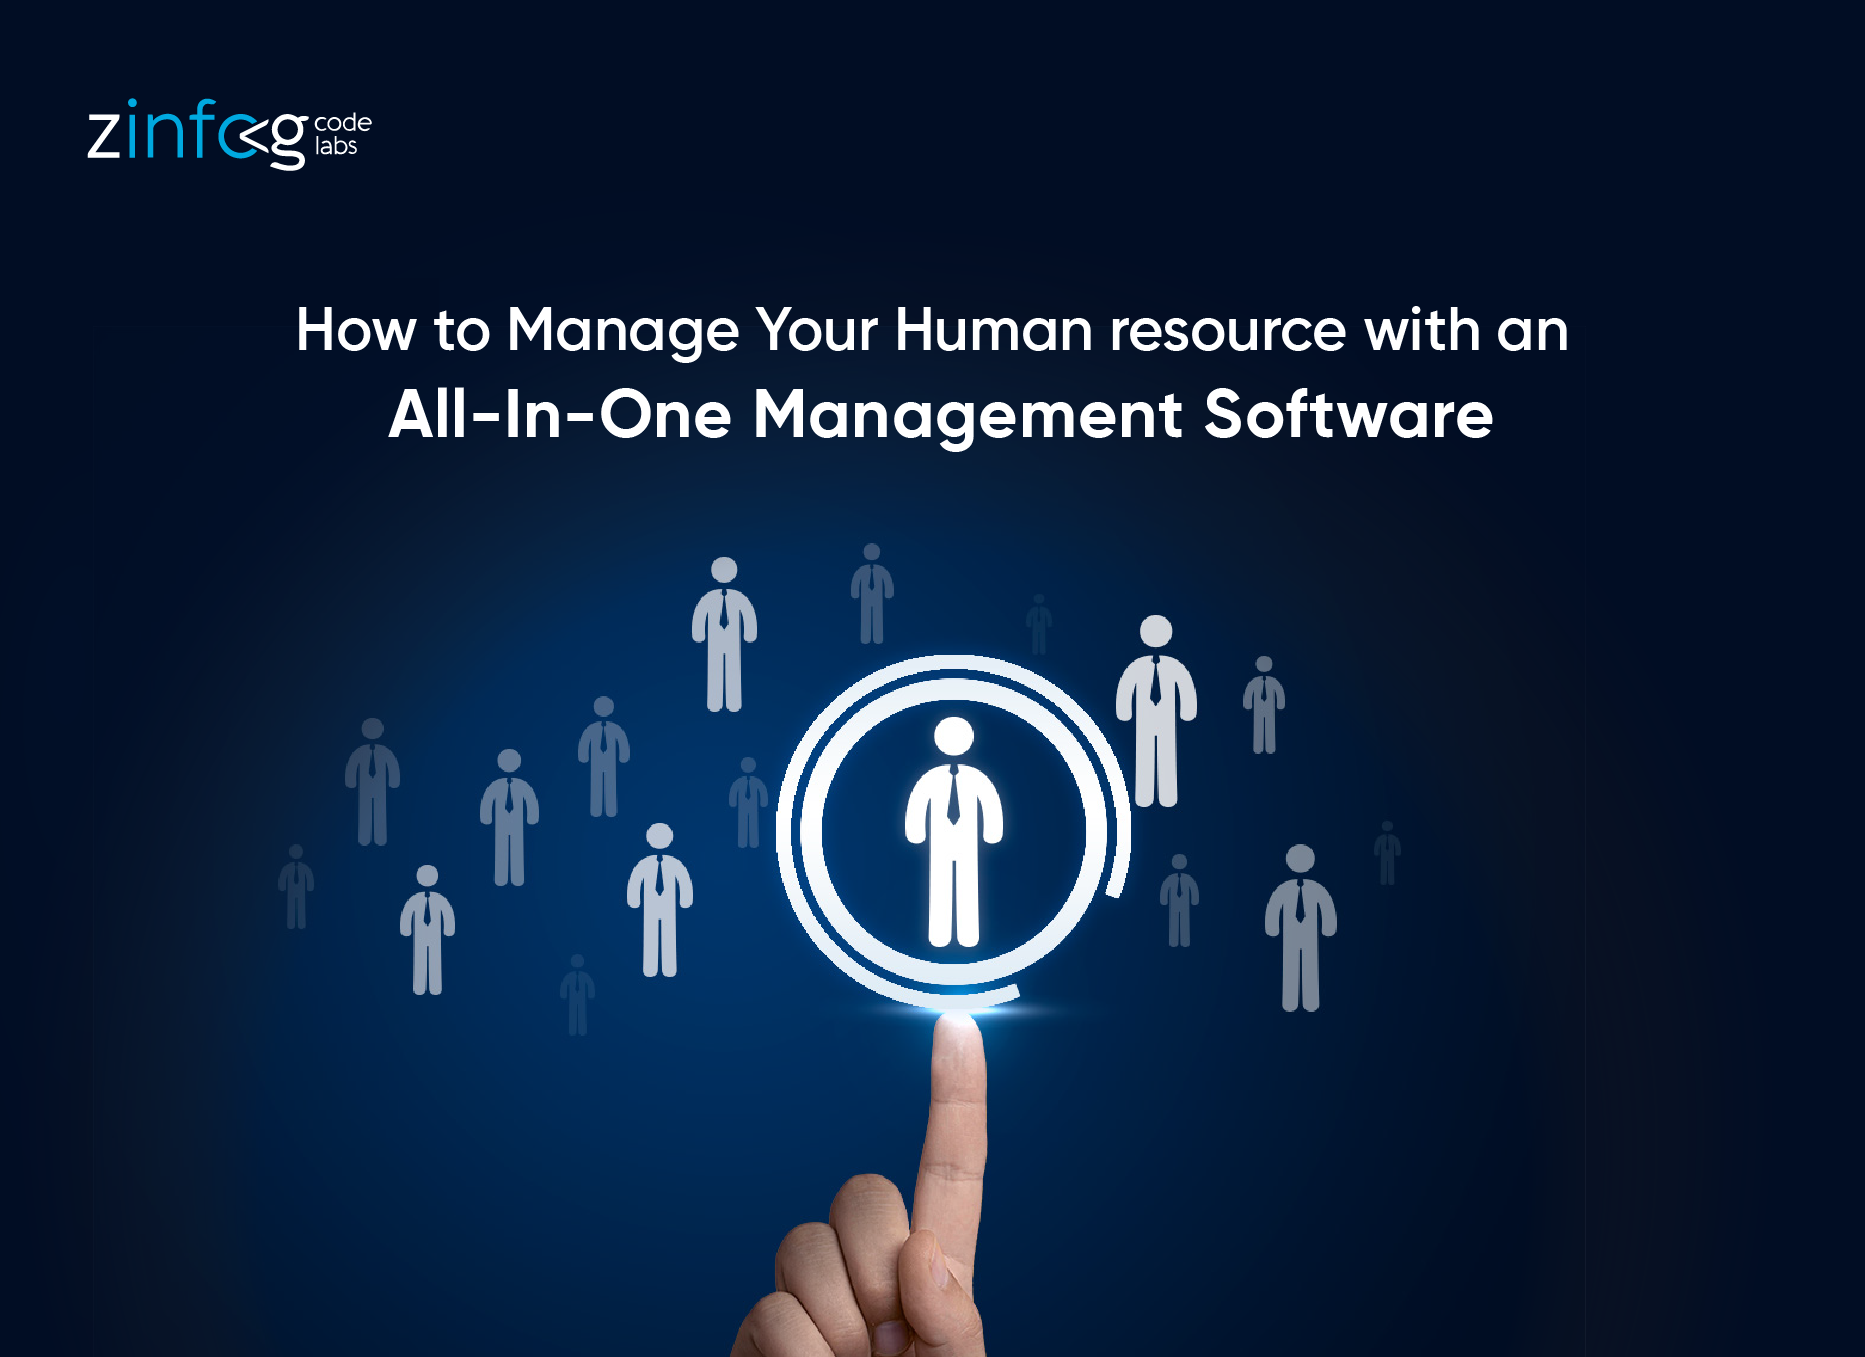 how-to-manage-your-human-resource-with-an-all-in-one-management-software.html